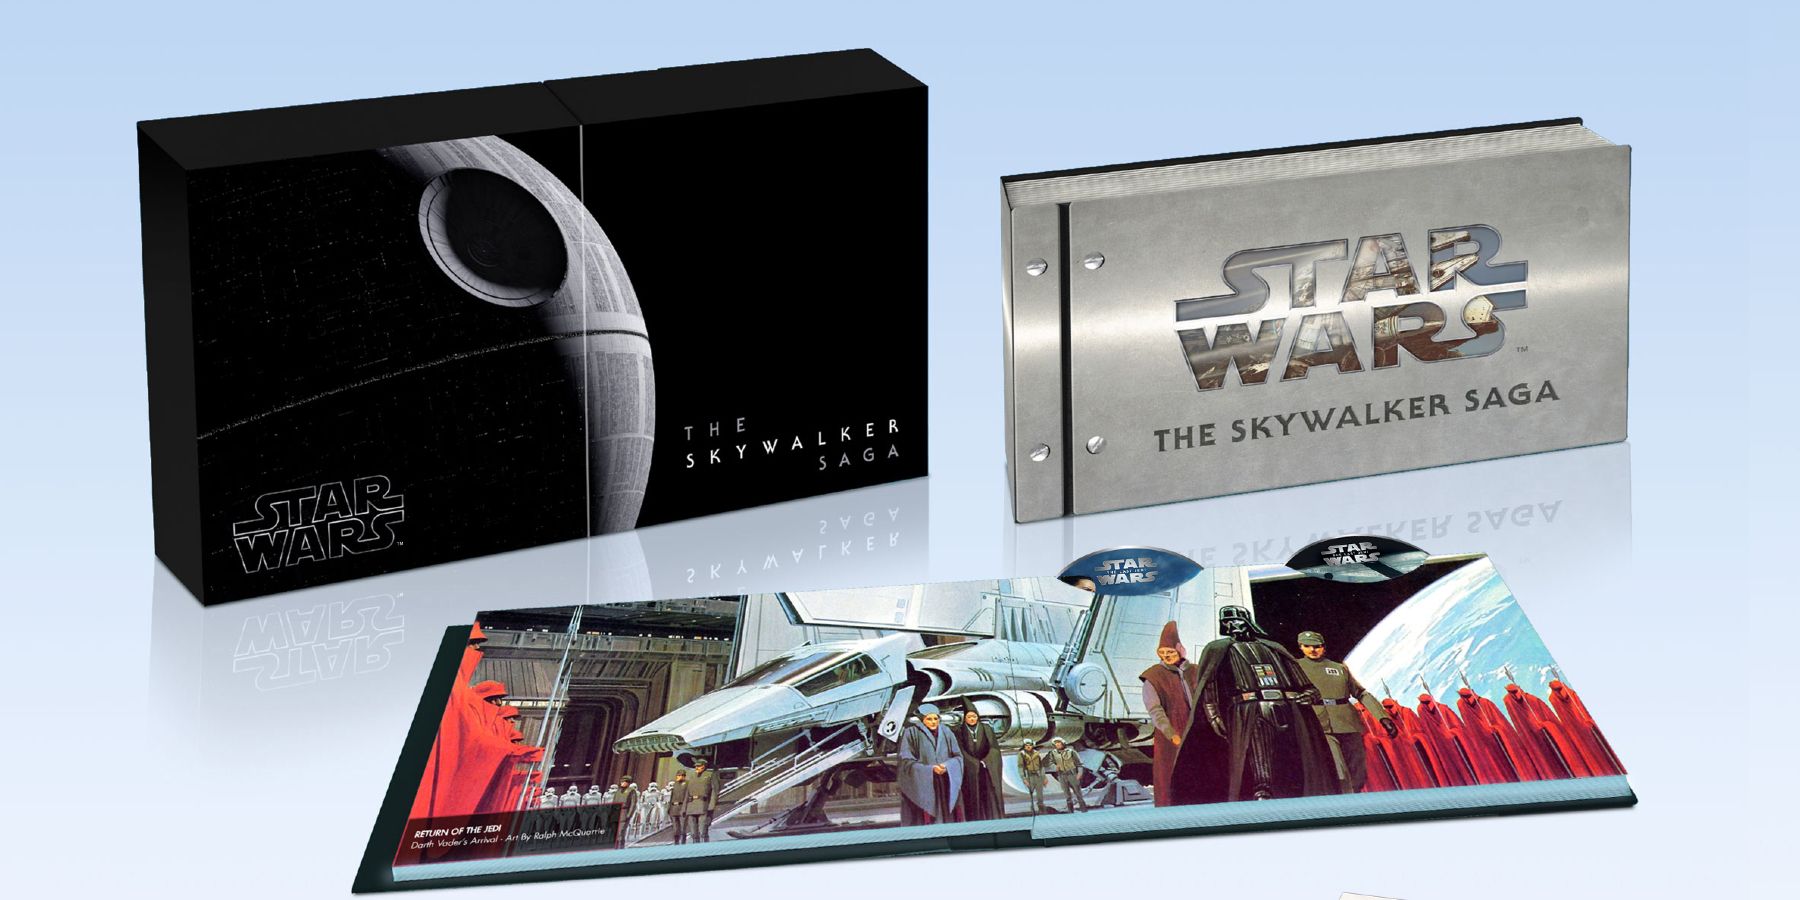 The 18 Best Blu-Ray Box Sets Ever Released